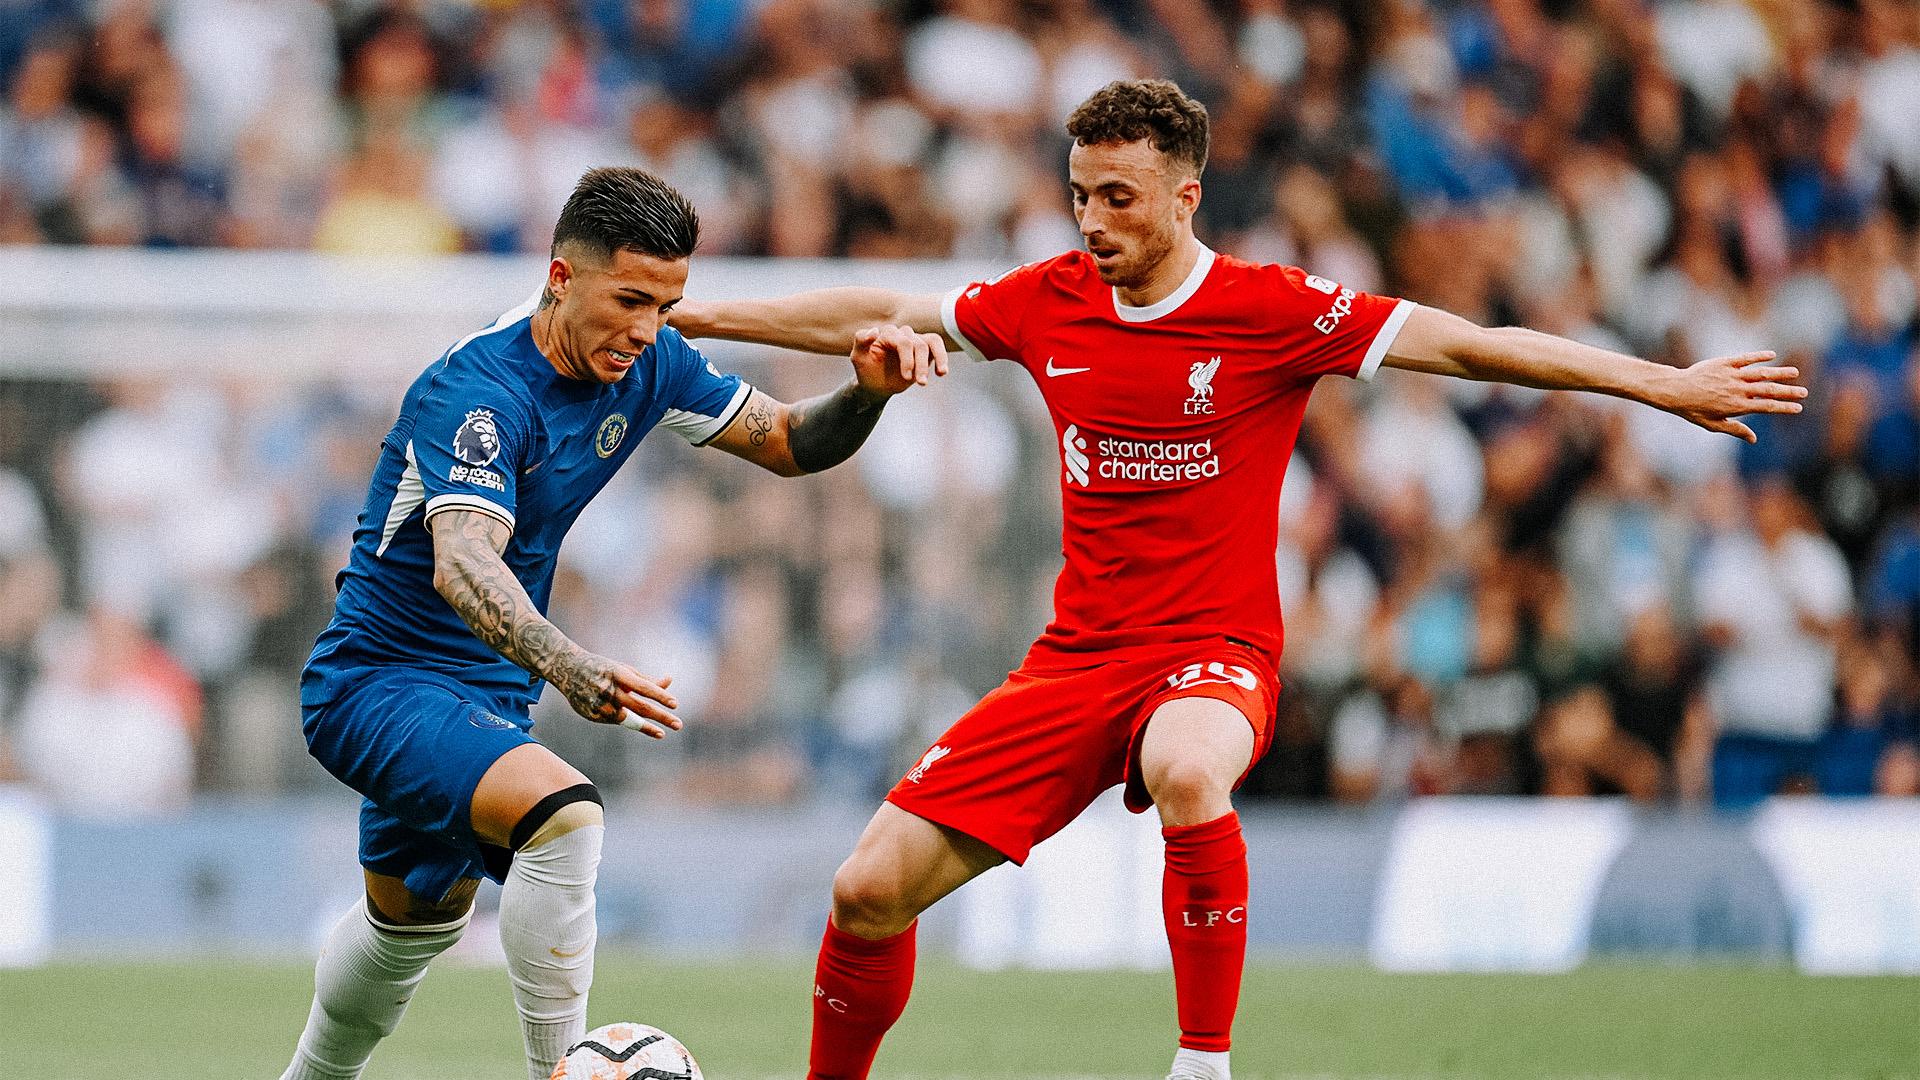 Liverpool play out opening day Premier League draw at Chelsea